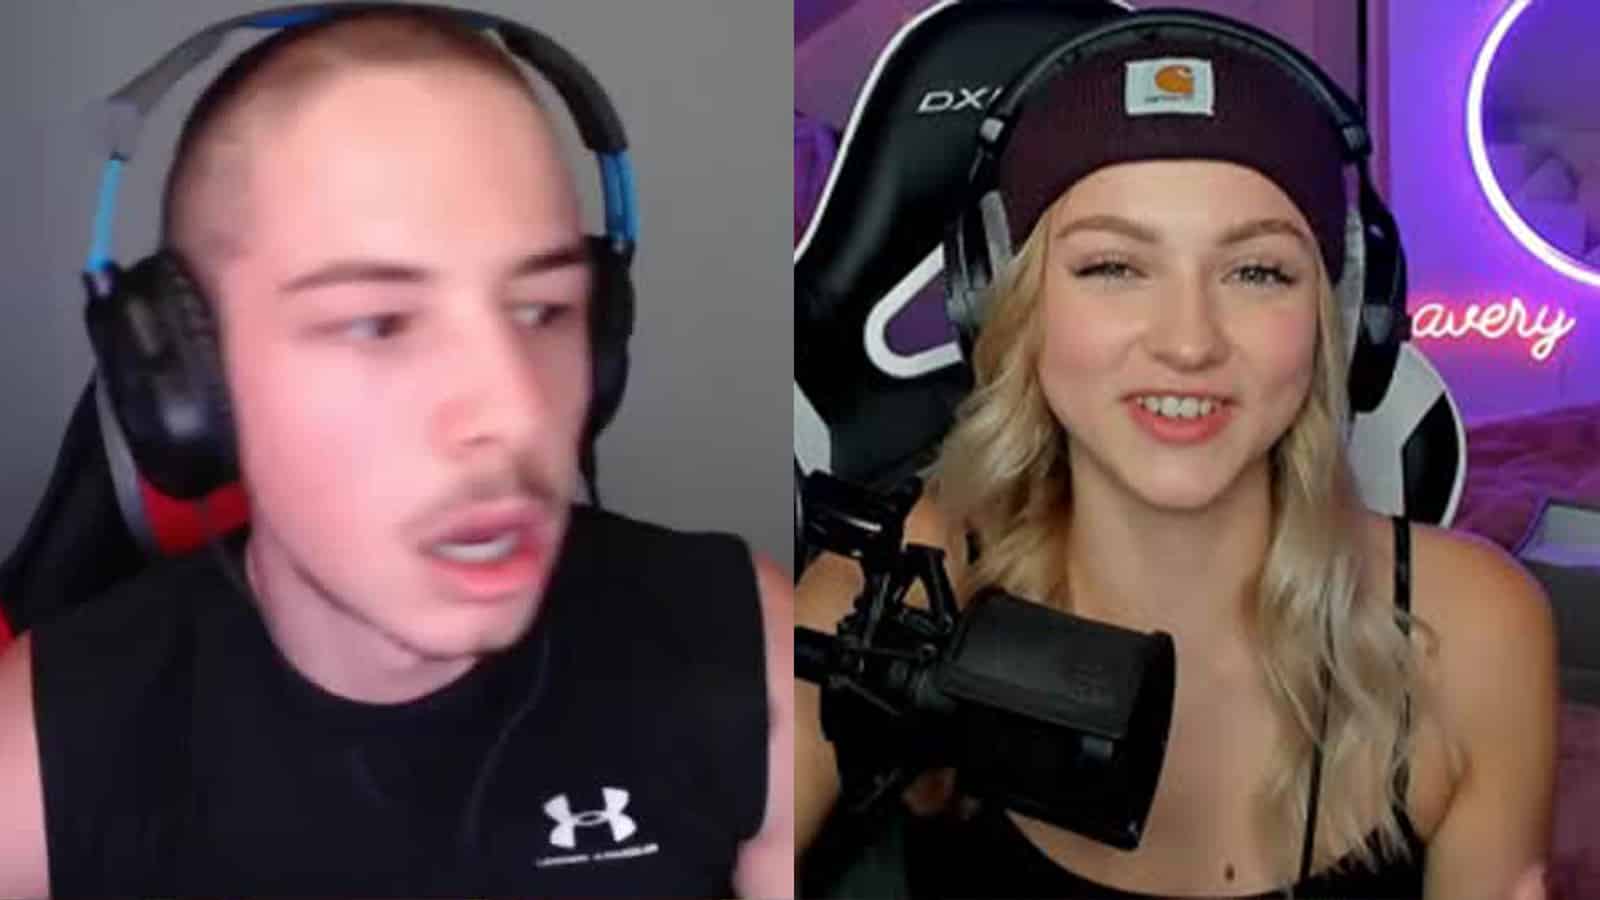 An image eof Twitch streamers Avery and Rydurz